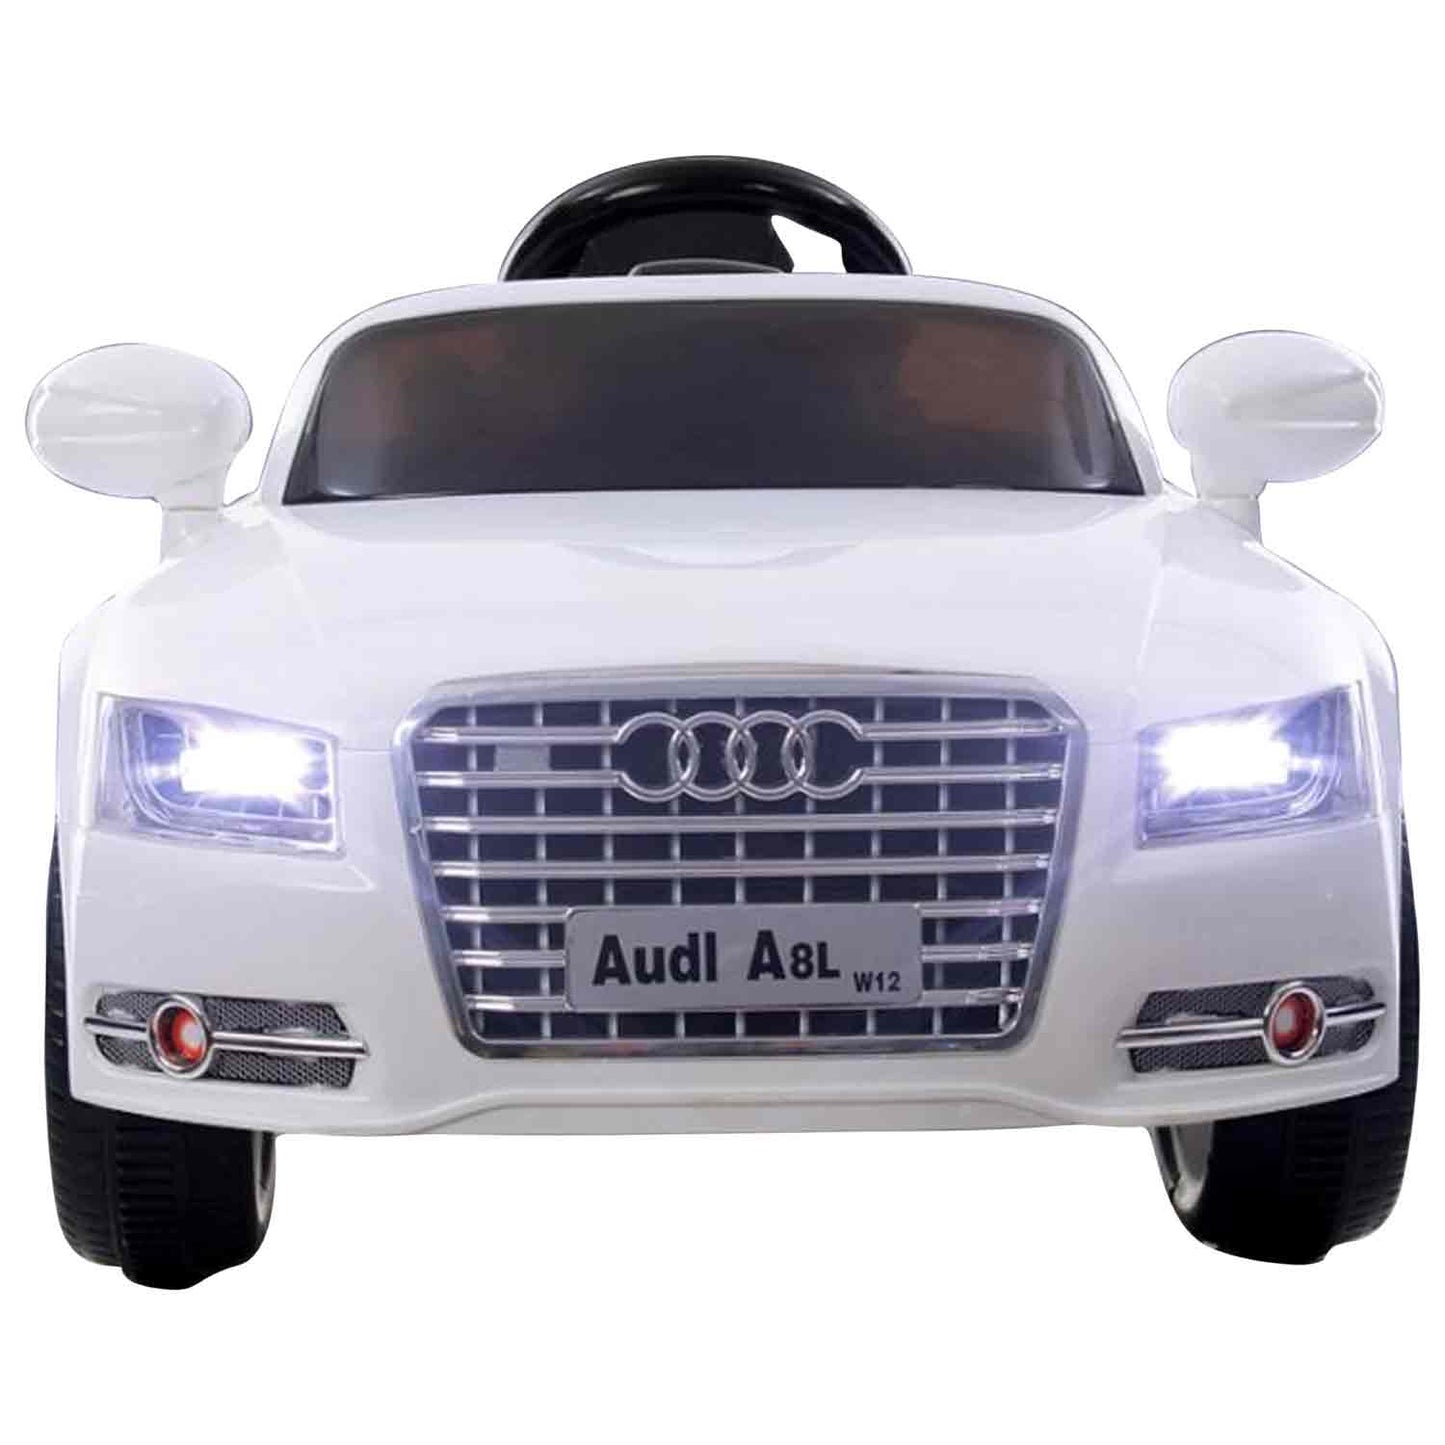 Audi A8L Toy Car(Without Packing)